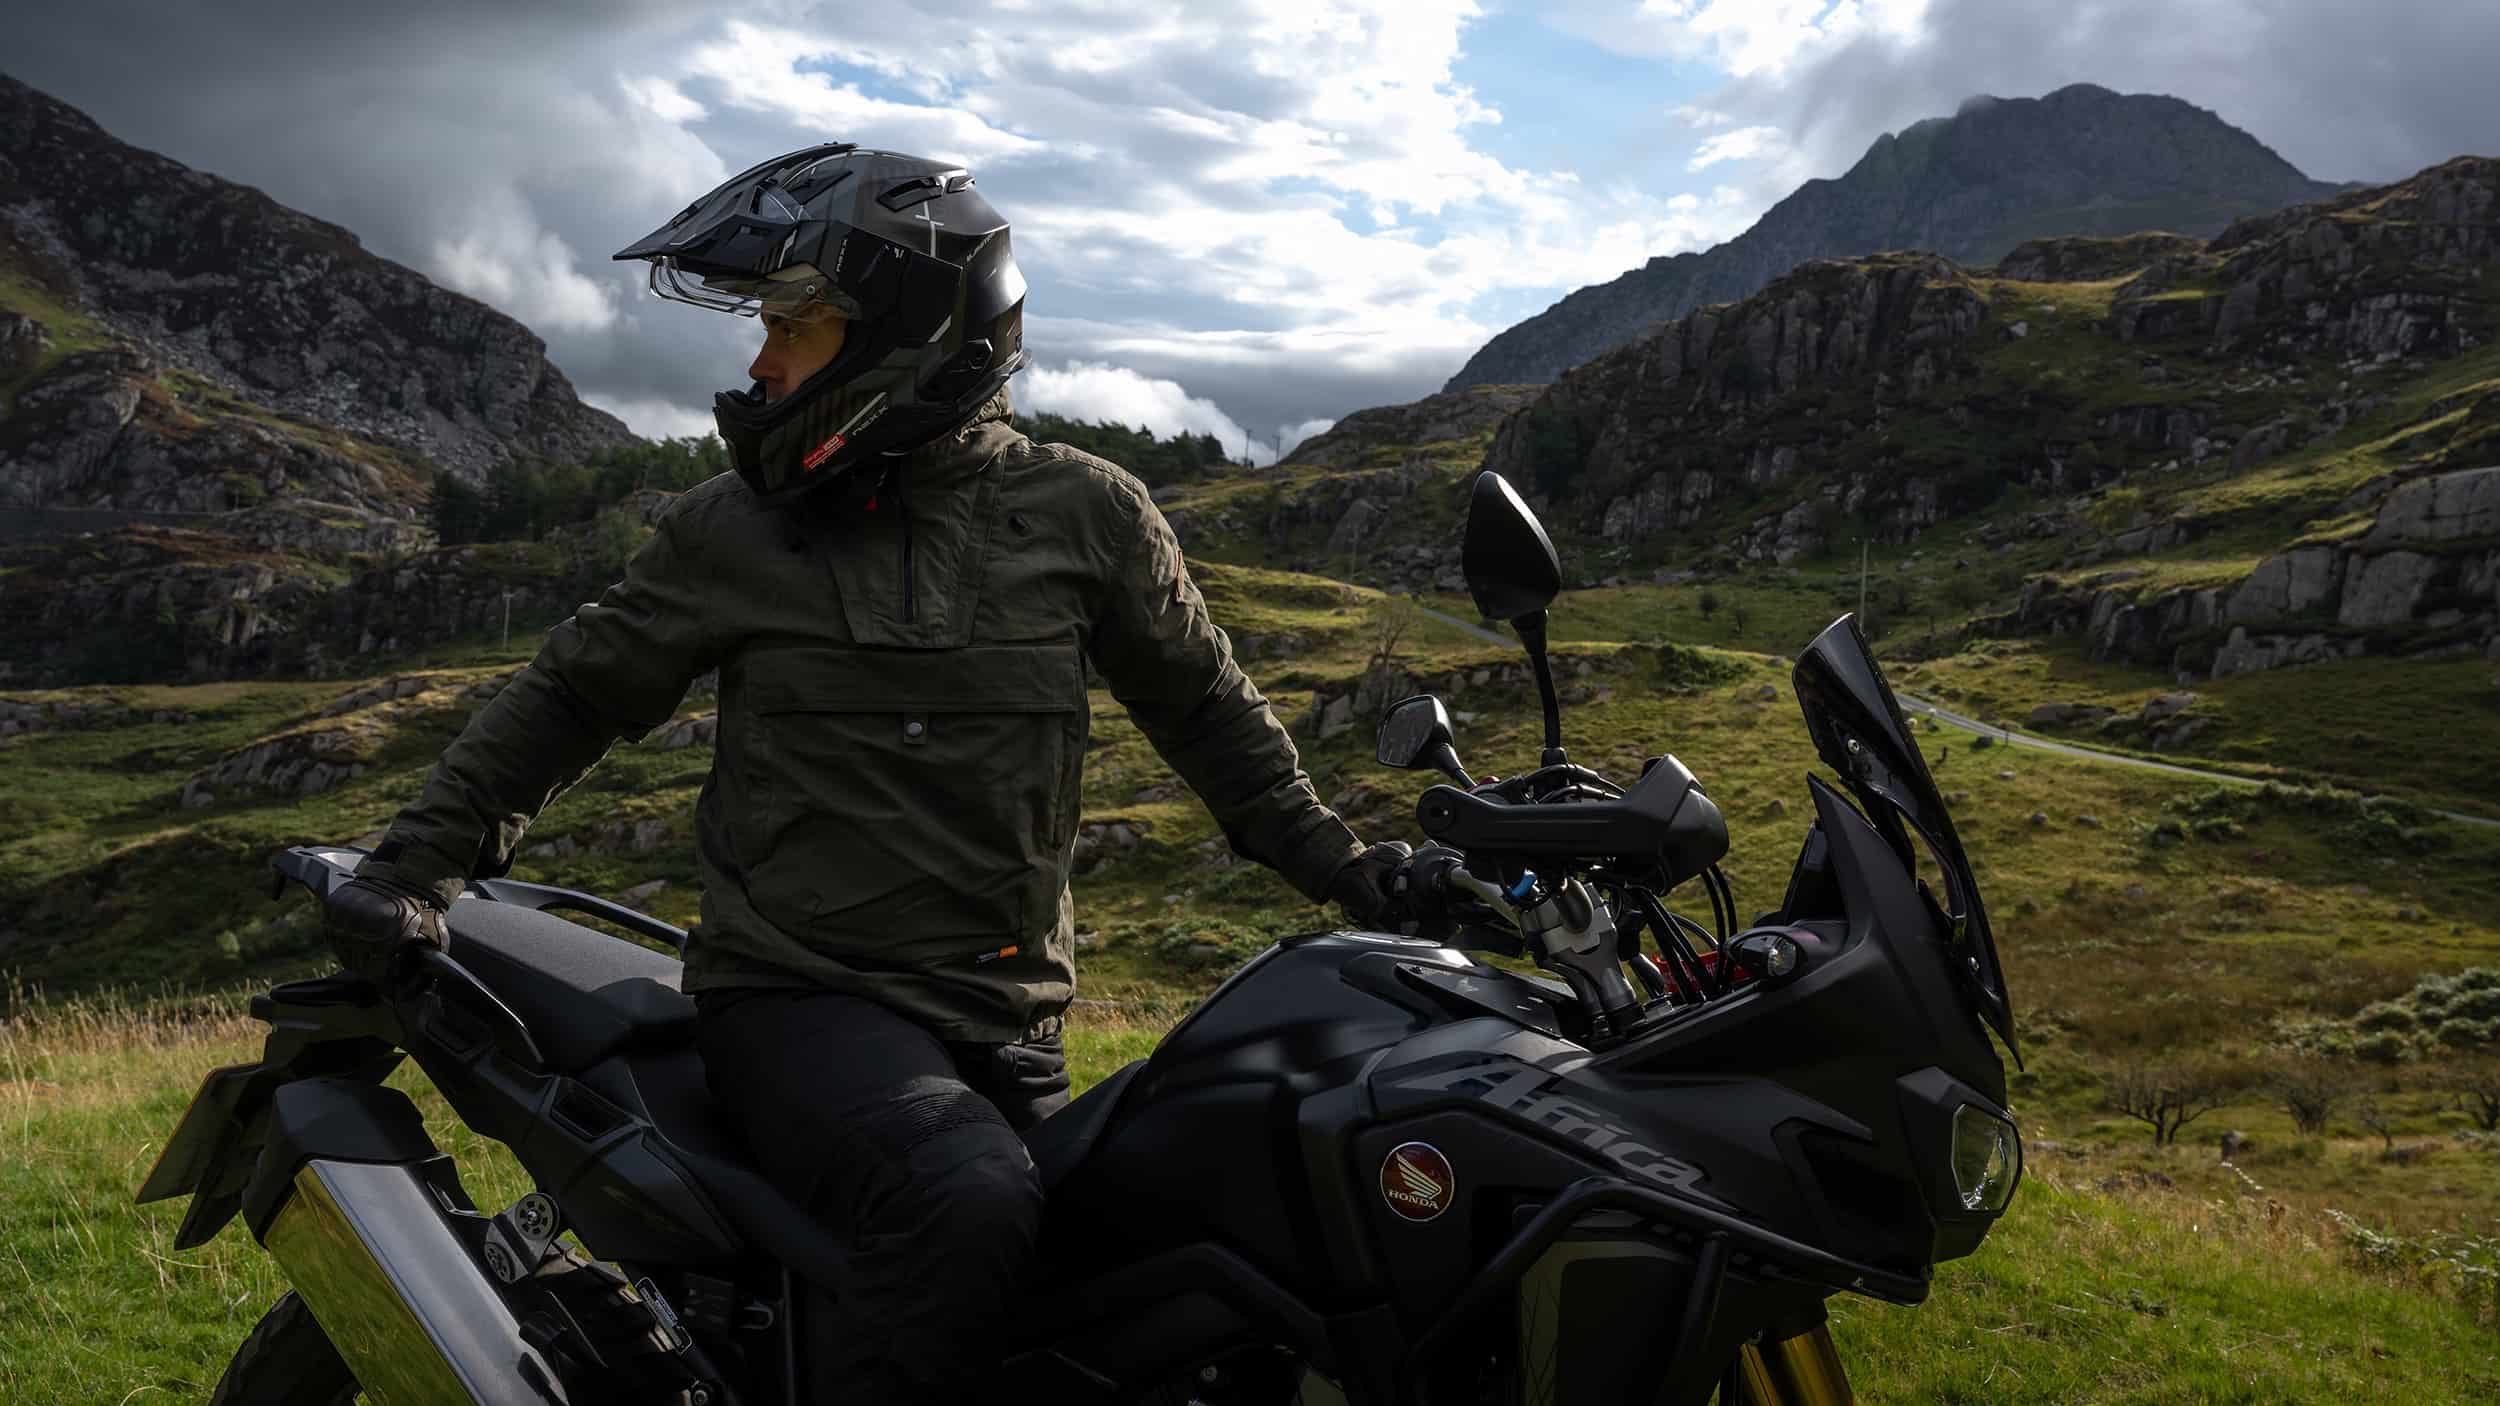 Behind the brand: About the team carving a new line in the motorcycle gear industry banner